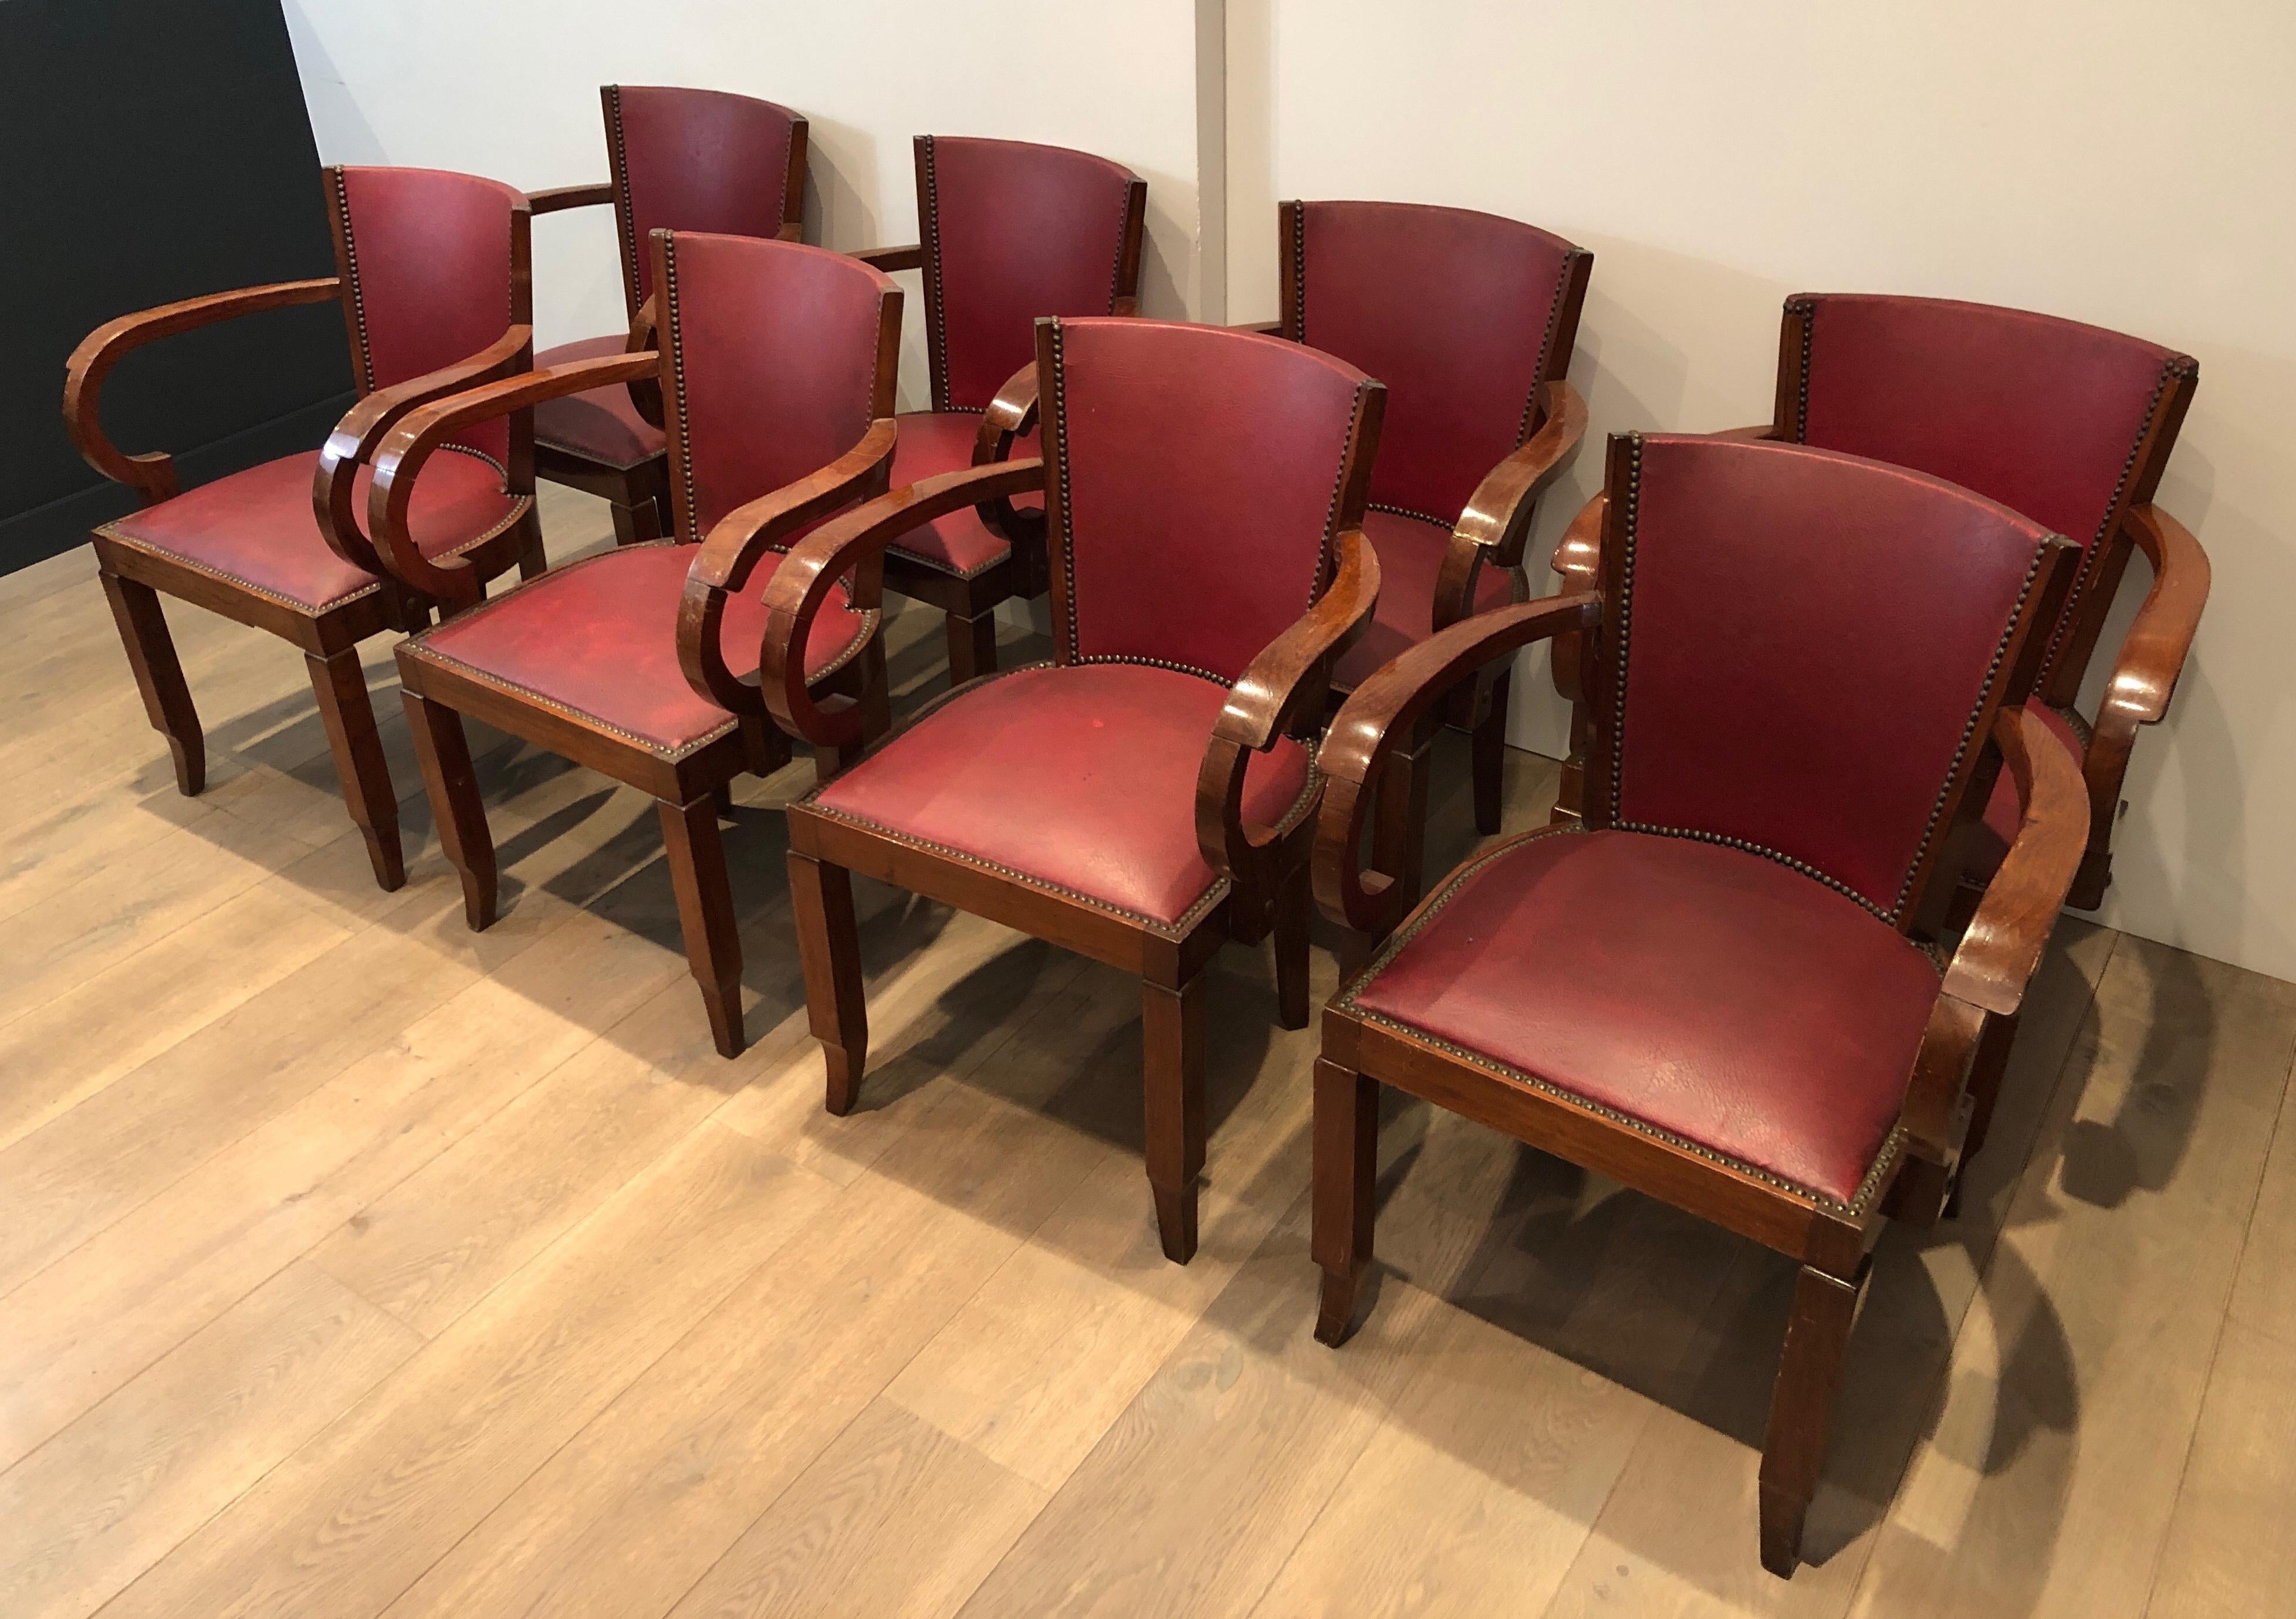 Rare Set of 8 Mahogany and Faux-Leather Art Deco Armchairs, French, circa 1930 For Sale 14